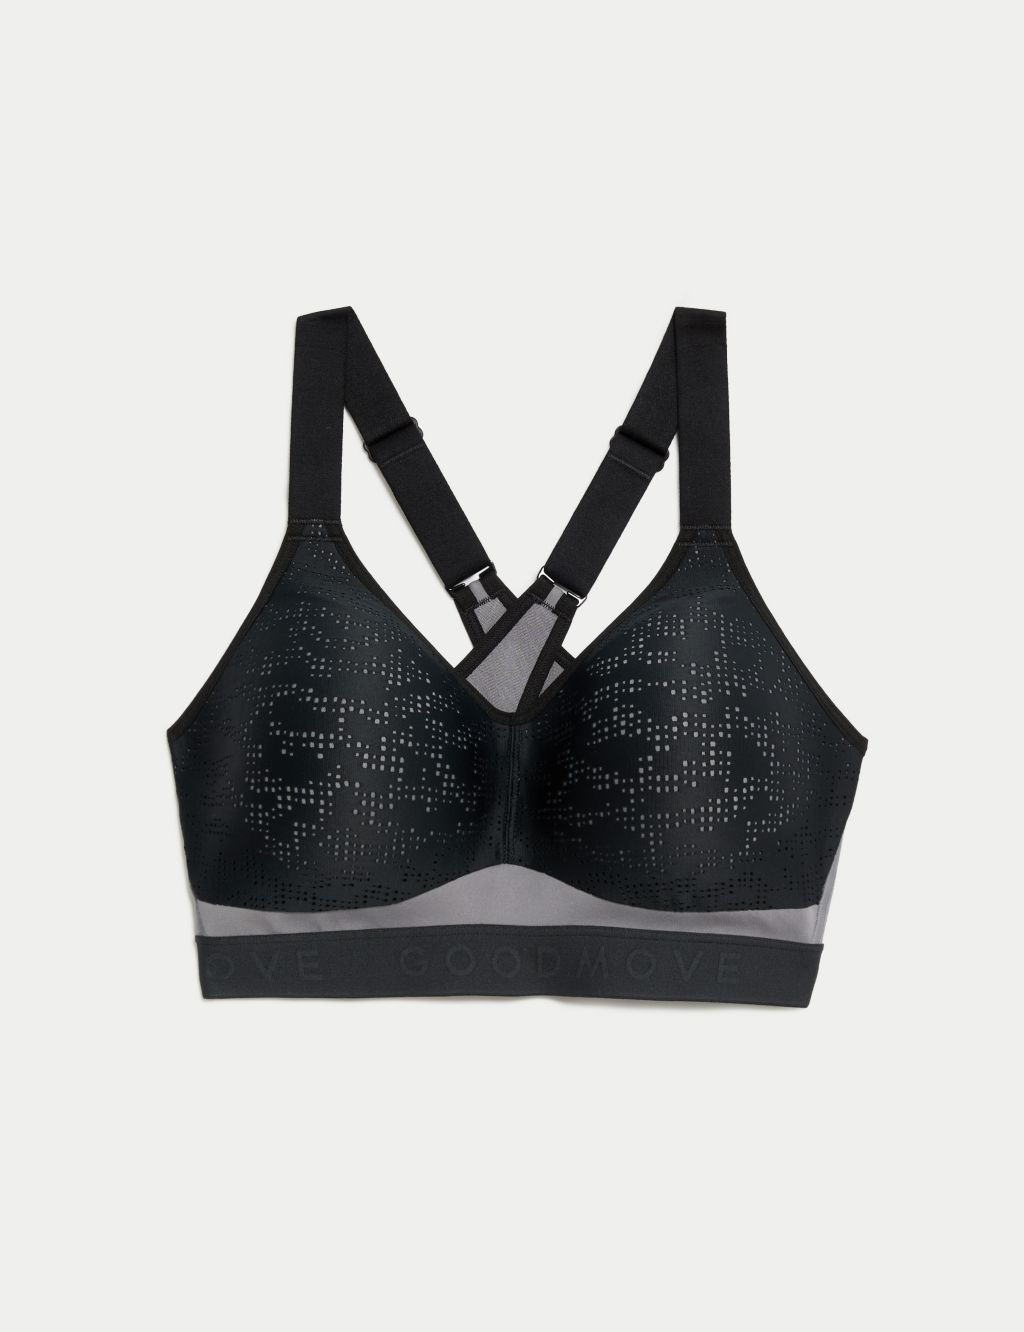 Freedom To Move Ultimate Support Sports Bra A-E 1 of 10